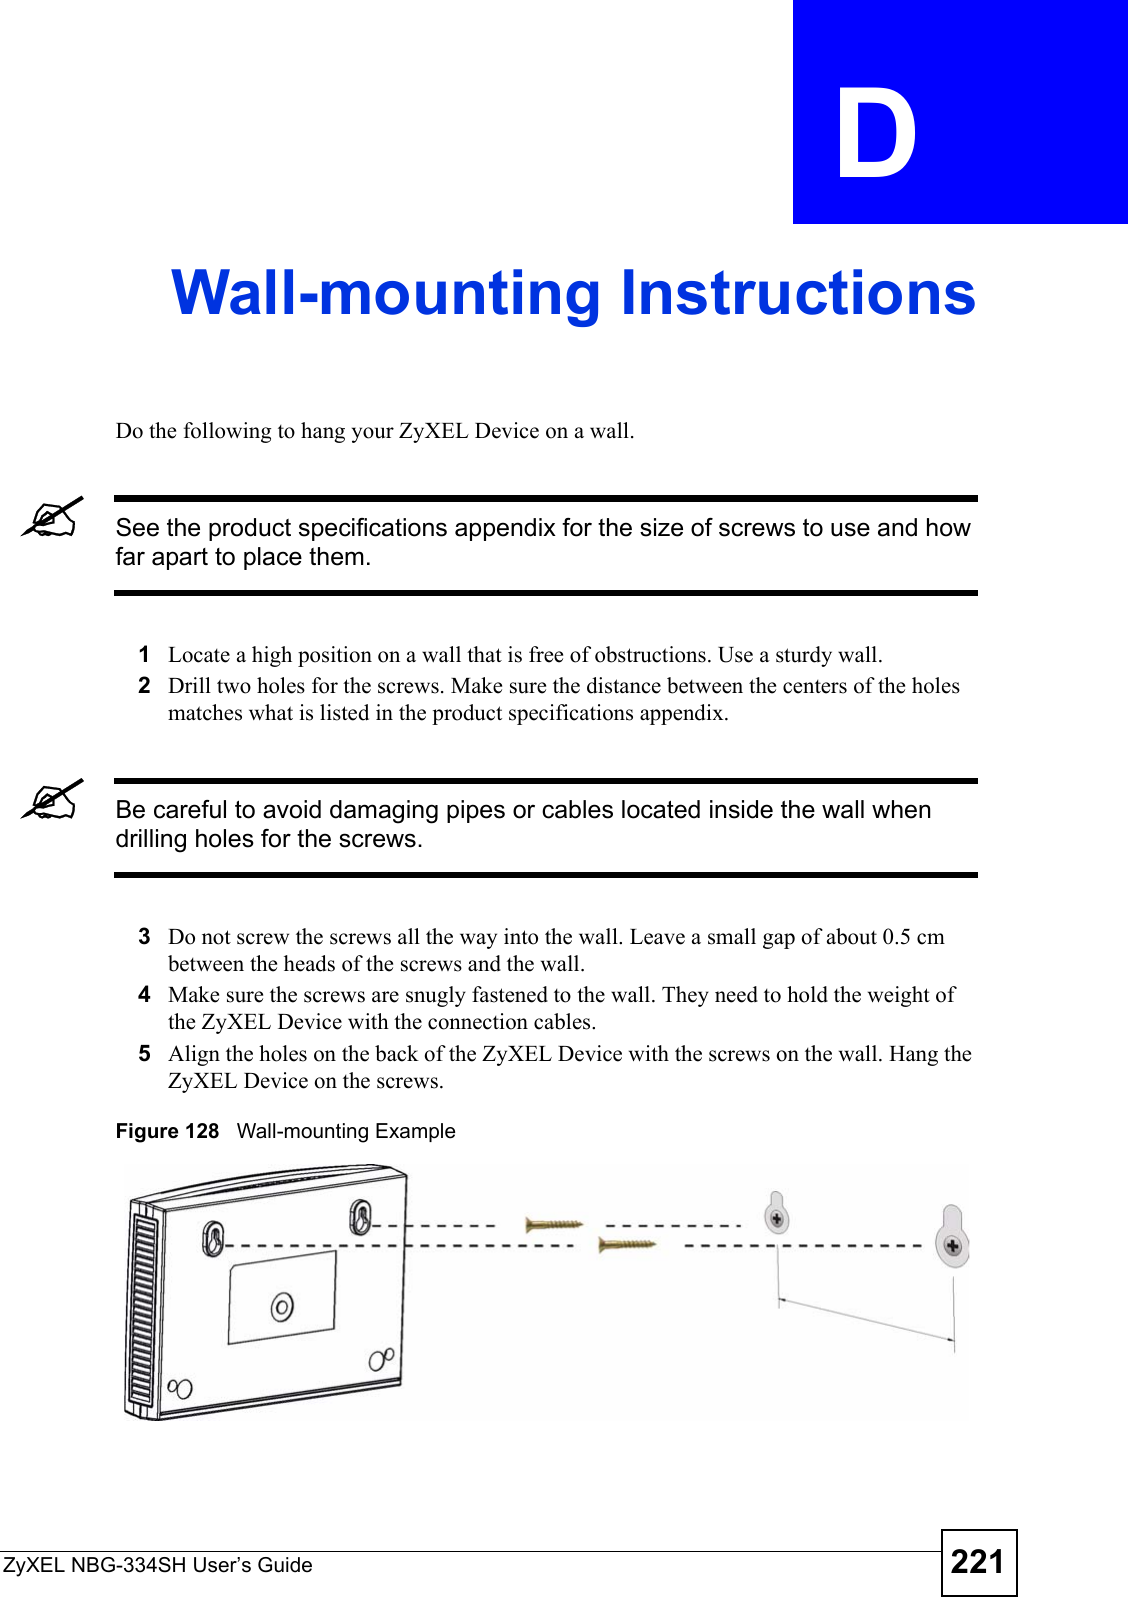 ZyXEL NBG-334SH User’s Guide 221APPENDIX  D Wall-mounting InstructionsDo the following to hang your ZyXEL Device on a wall.&quot;See the product specifications appendix for the size of screws to use and how far apart to place them.1Locate a high position on a wall that is free of obstructions. Use a sturdy wall.2Drill two holes for the screws. Make sure the distance between the centers of the holes matches what is listed in the product specifications appendix.&quot;Be careful to avoid damaging pipes or cables located inside the wall when drilling holes for the screws.3Do not screw the screws all the way into the wall. Leave a small gap of about 0.5 cm between the heads of the screws and the wall.  4Make sure the screws are snugly fastened to the wall. They need to hold the weight of the ZyXEL Device with the connection cables. 5Align the holes on the back of the ZyXEL Device with the screws on the wall. Hang the ZyXEL Device on the screws.Figure 128   Wall-mounting Example